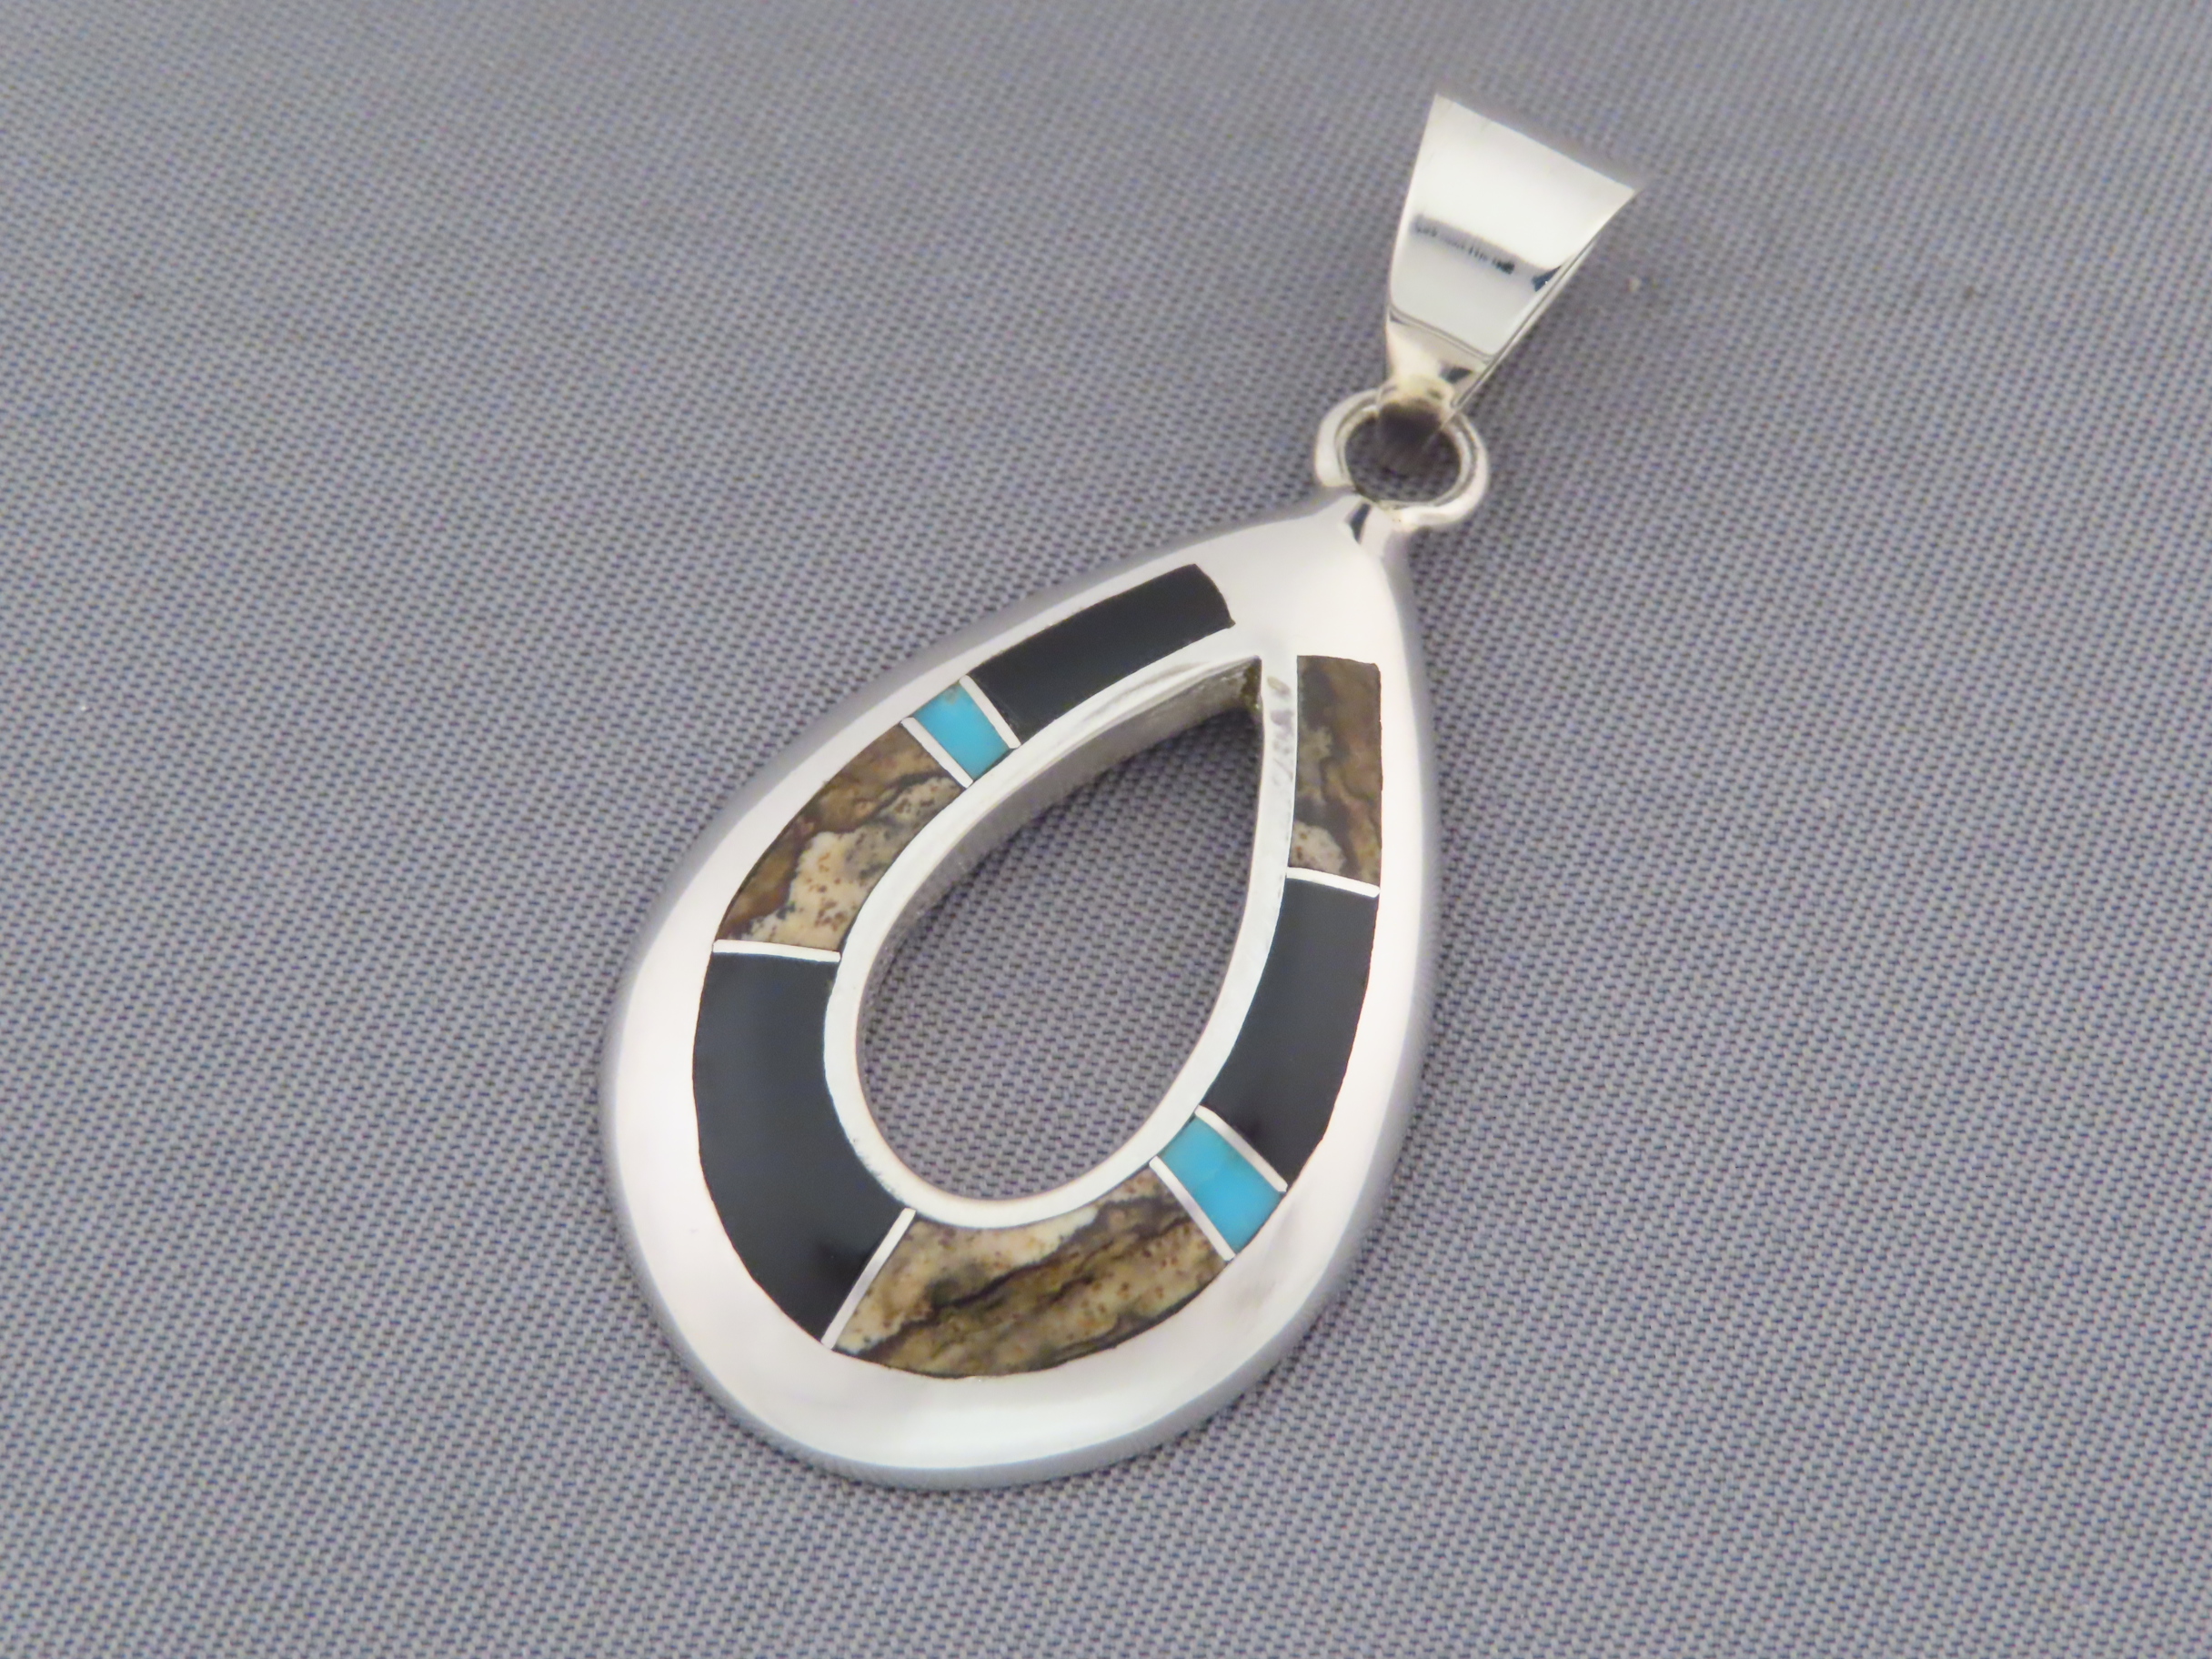 Details about    Sterling Silver Teardrop Shaped Pendant W Chip Turquoise & Coral Inlay 